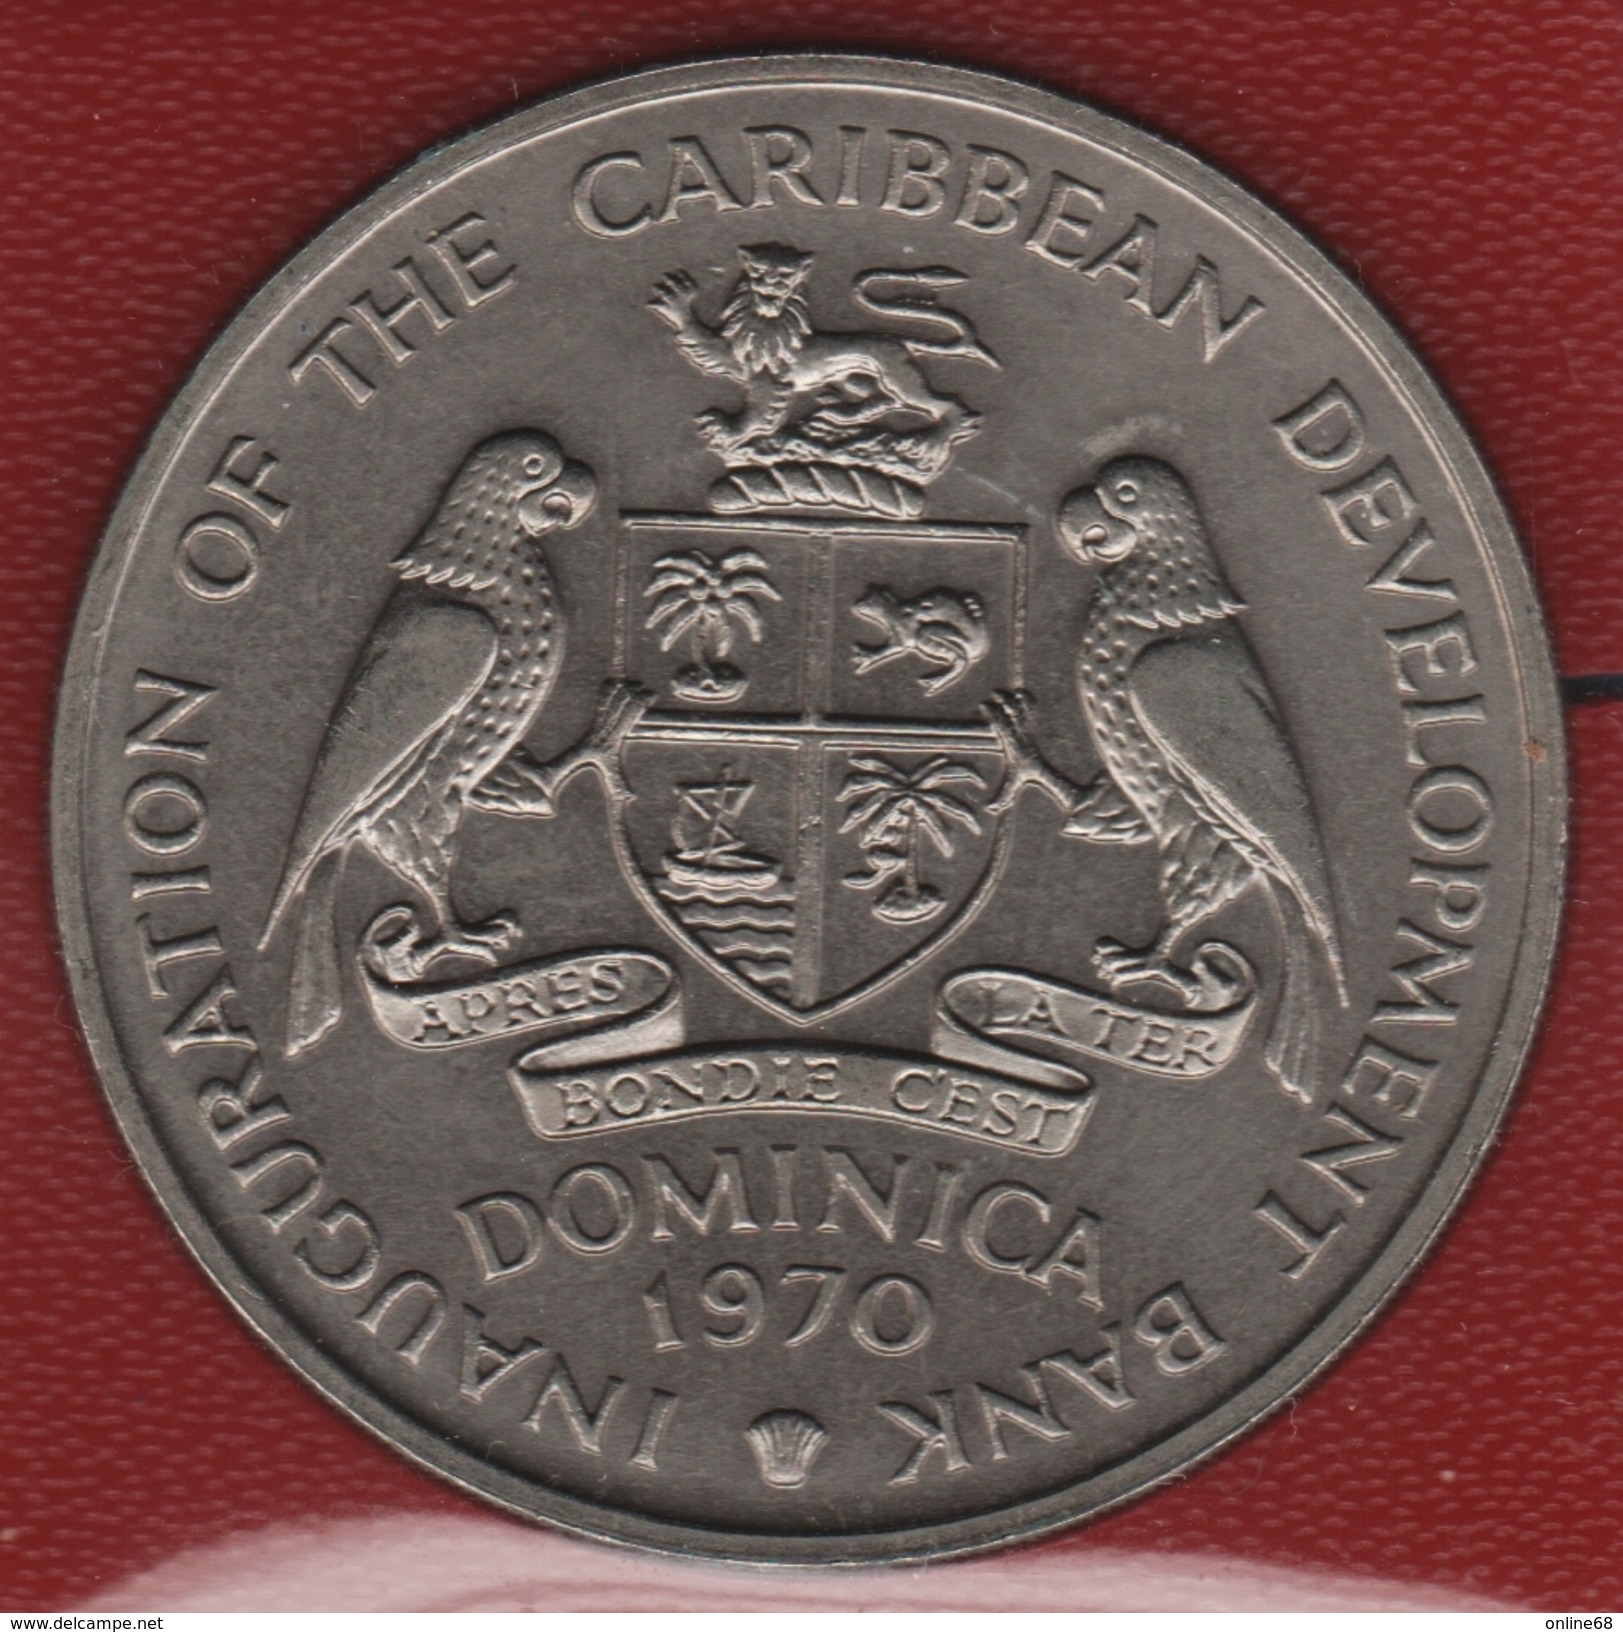 DOMINICA 4 DOLLARS 1970 FAO INAUGURATION OF THE CARIBBEAN DEVELOPEMENT BANK KM# 11 - Territoires Des Caraïbes Orientales